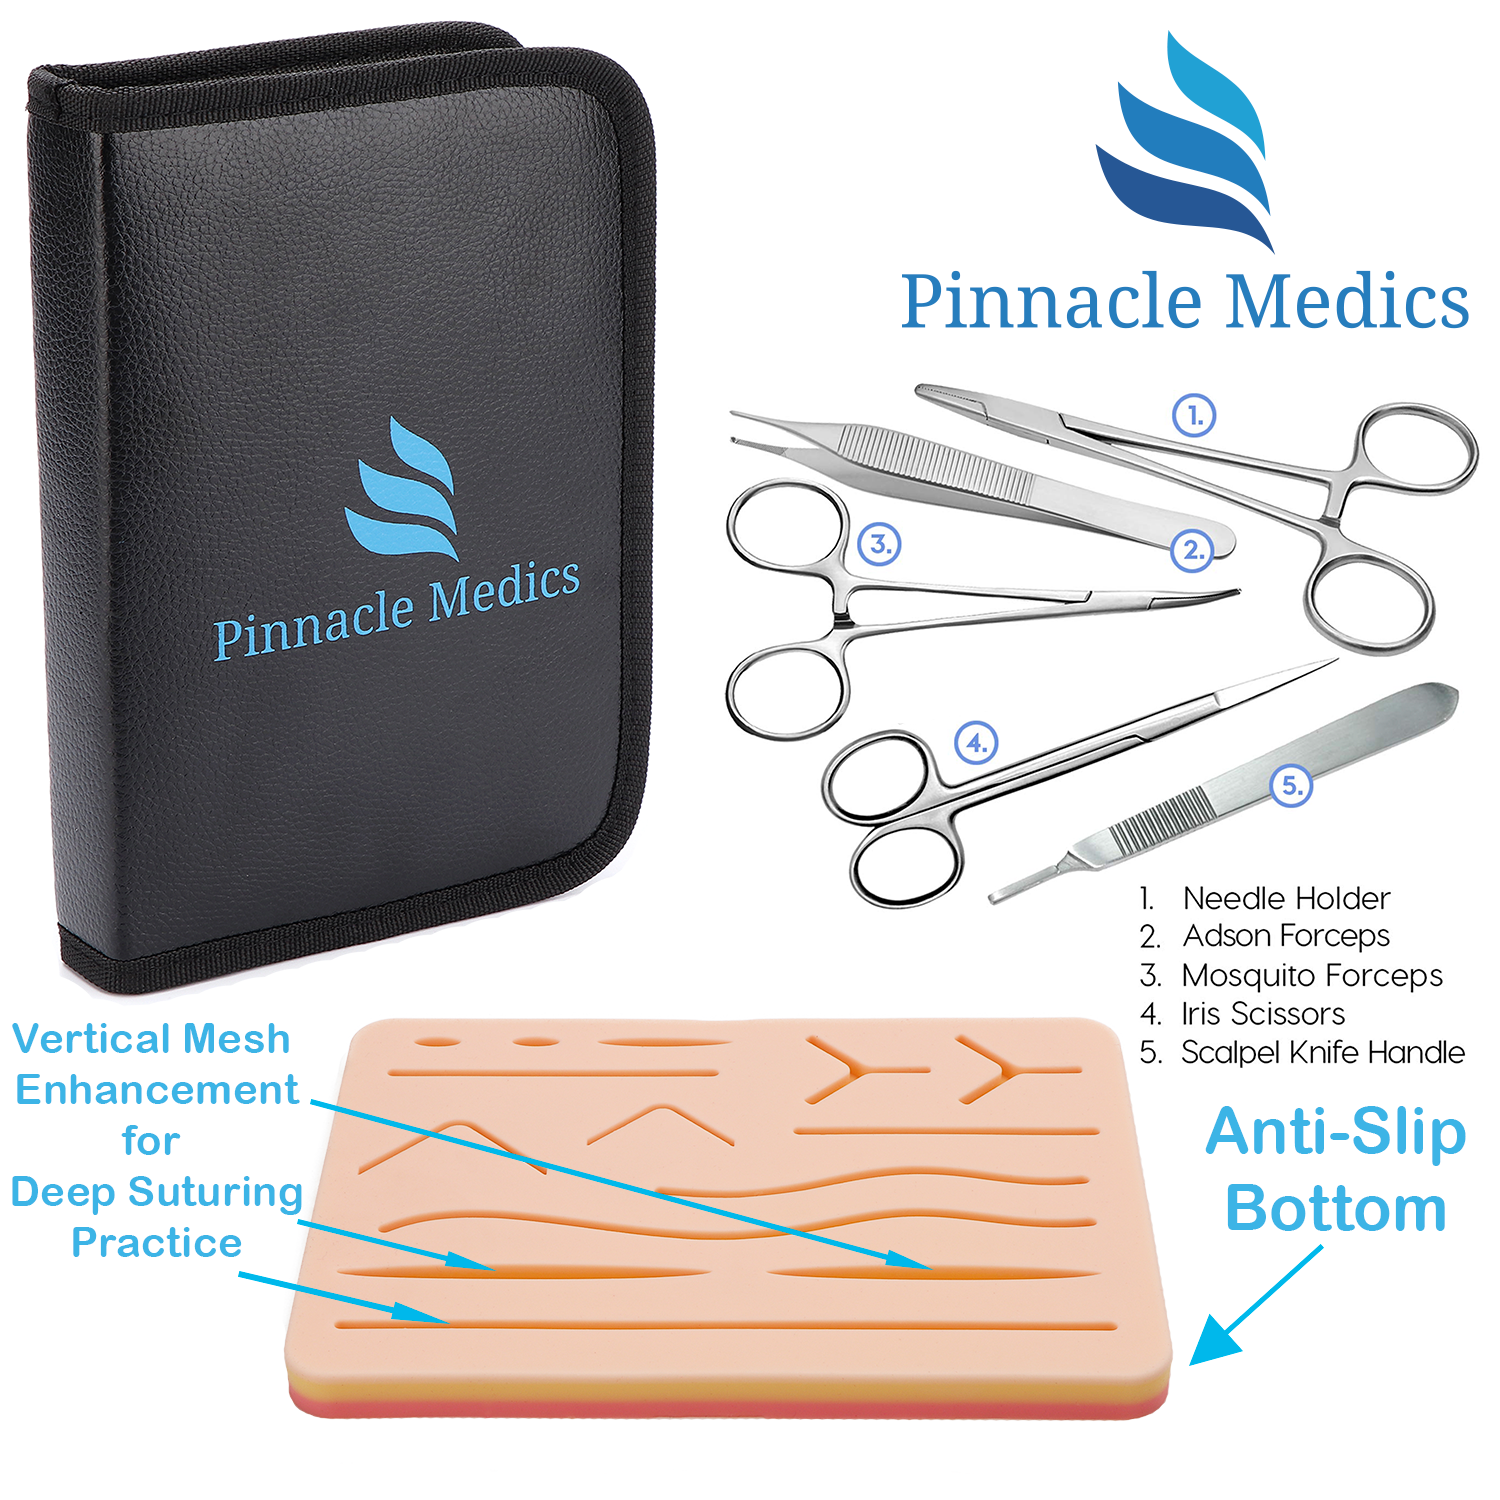 Complete Suture Kit for Medical Students​ - A Plus Medics